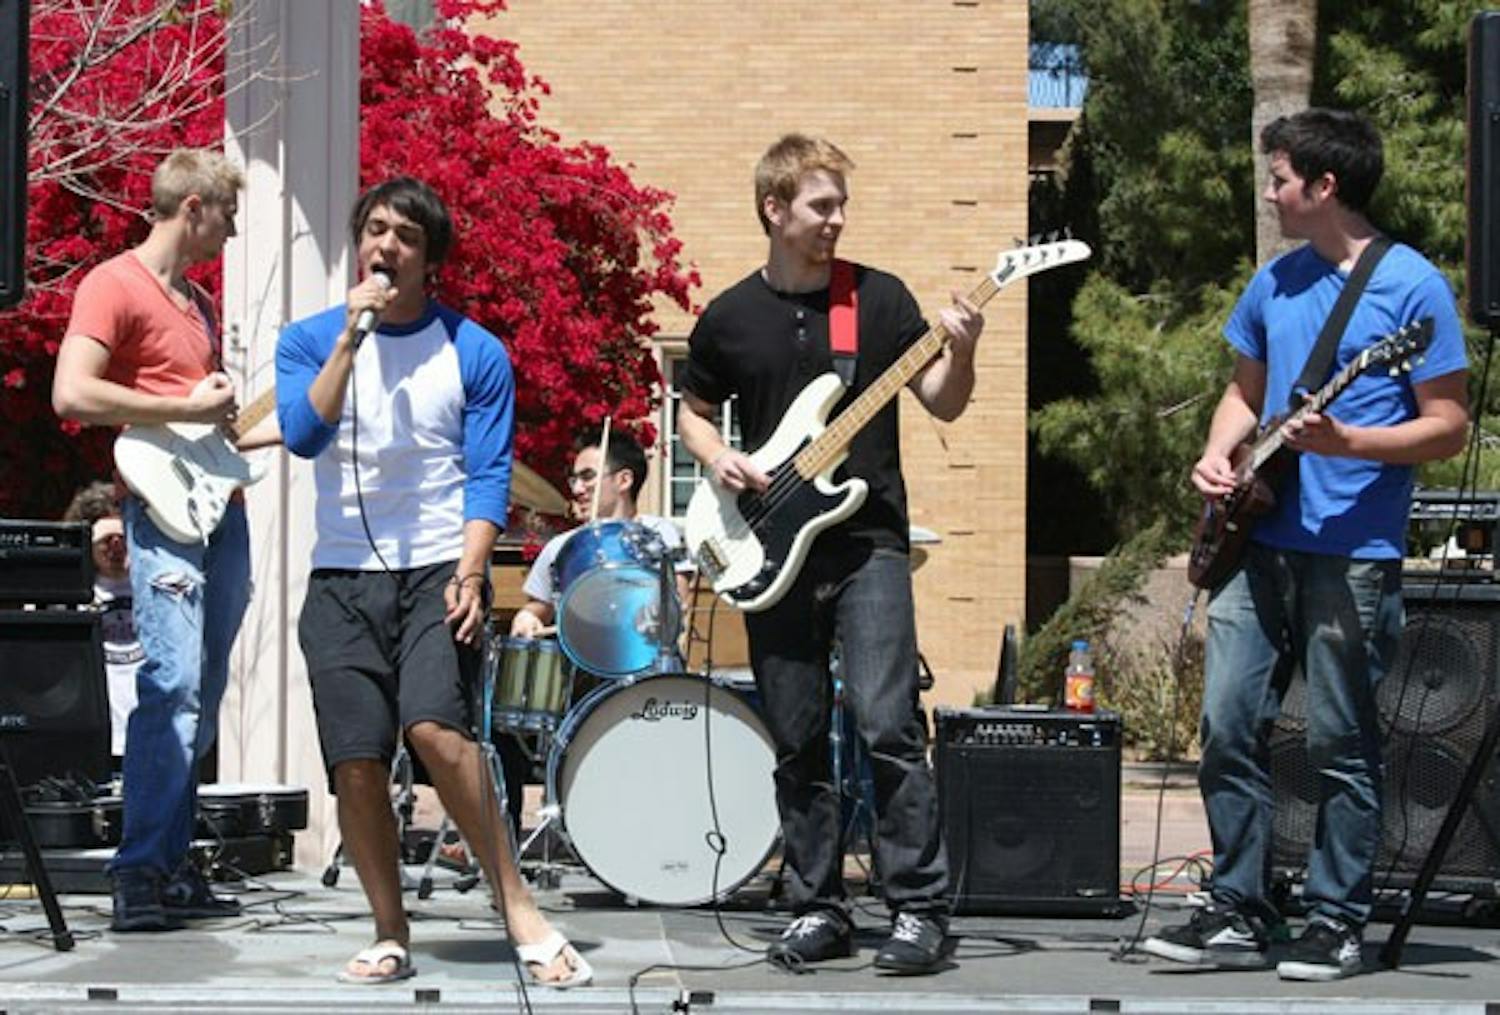 MUSIC AND SHOES: If You Say Atlantic performs on Hayden Lawn Monday afternoon. The band was part of Tom's Shoe Drive for Haiti, which collected gently used shoes to be sent to Haiti. (Photo Jessica Weisel)